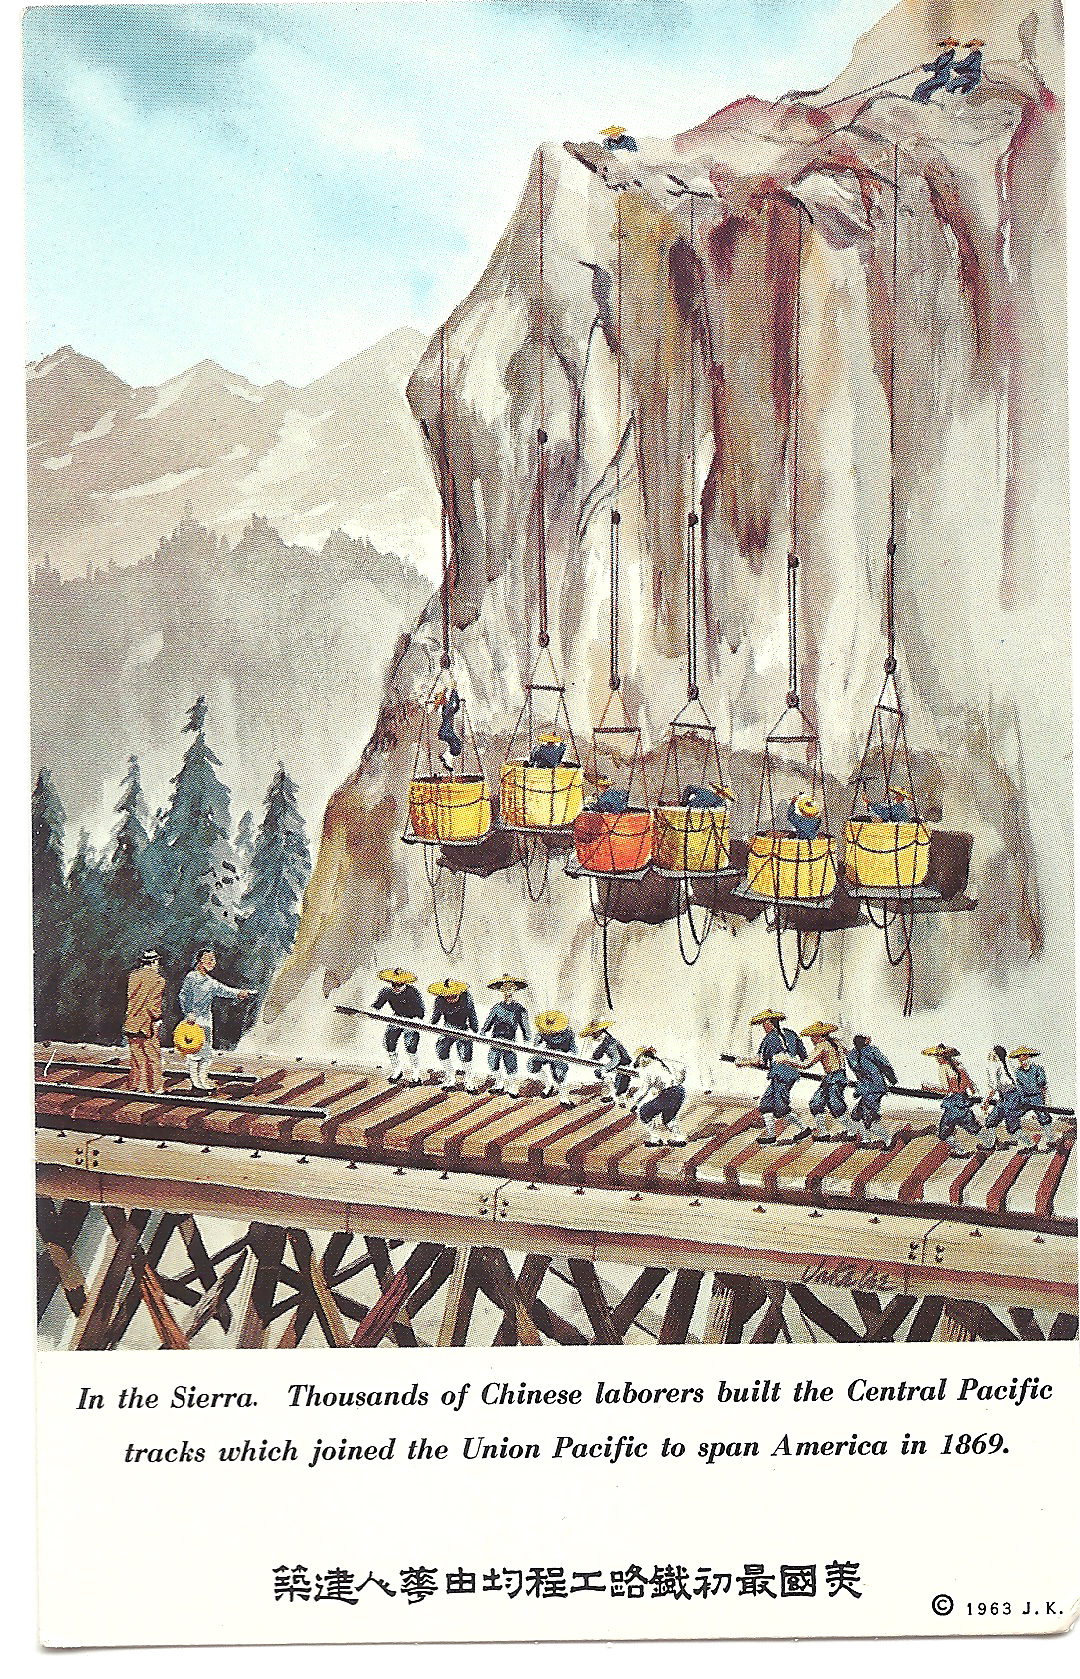 01 April 2019 Posted.
Postcard of Chinese laborers building the Central Pacific Railroad in the mid-1800s. Courtesy of Alex Jay, Museum of Chinese in America (MOCA) Collection.
19世纪80年代中期华人劳工修建美国中央太平洋铁路明信片Alex Jay捐赠，美国华人博物馆（MOCA）馆藏